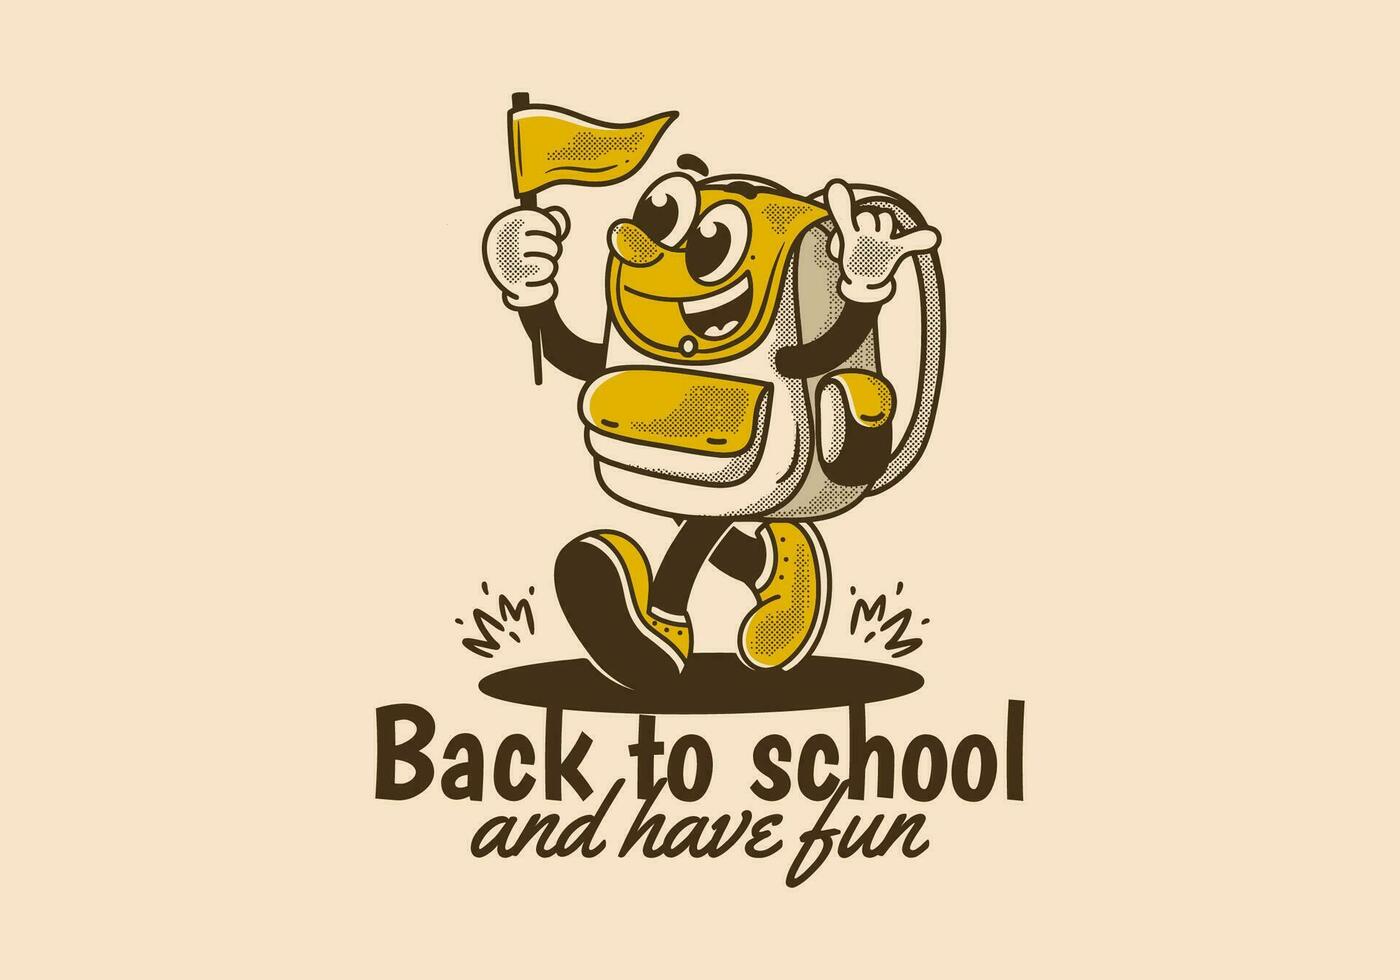 Back to school and have fun. Mascot character illustration of walking school bag holding a flag vector